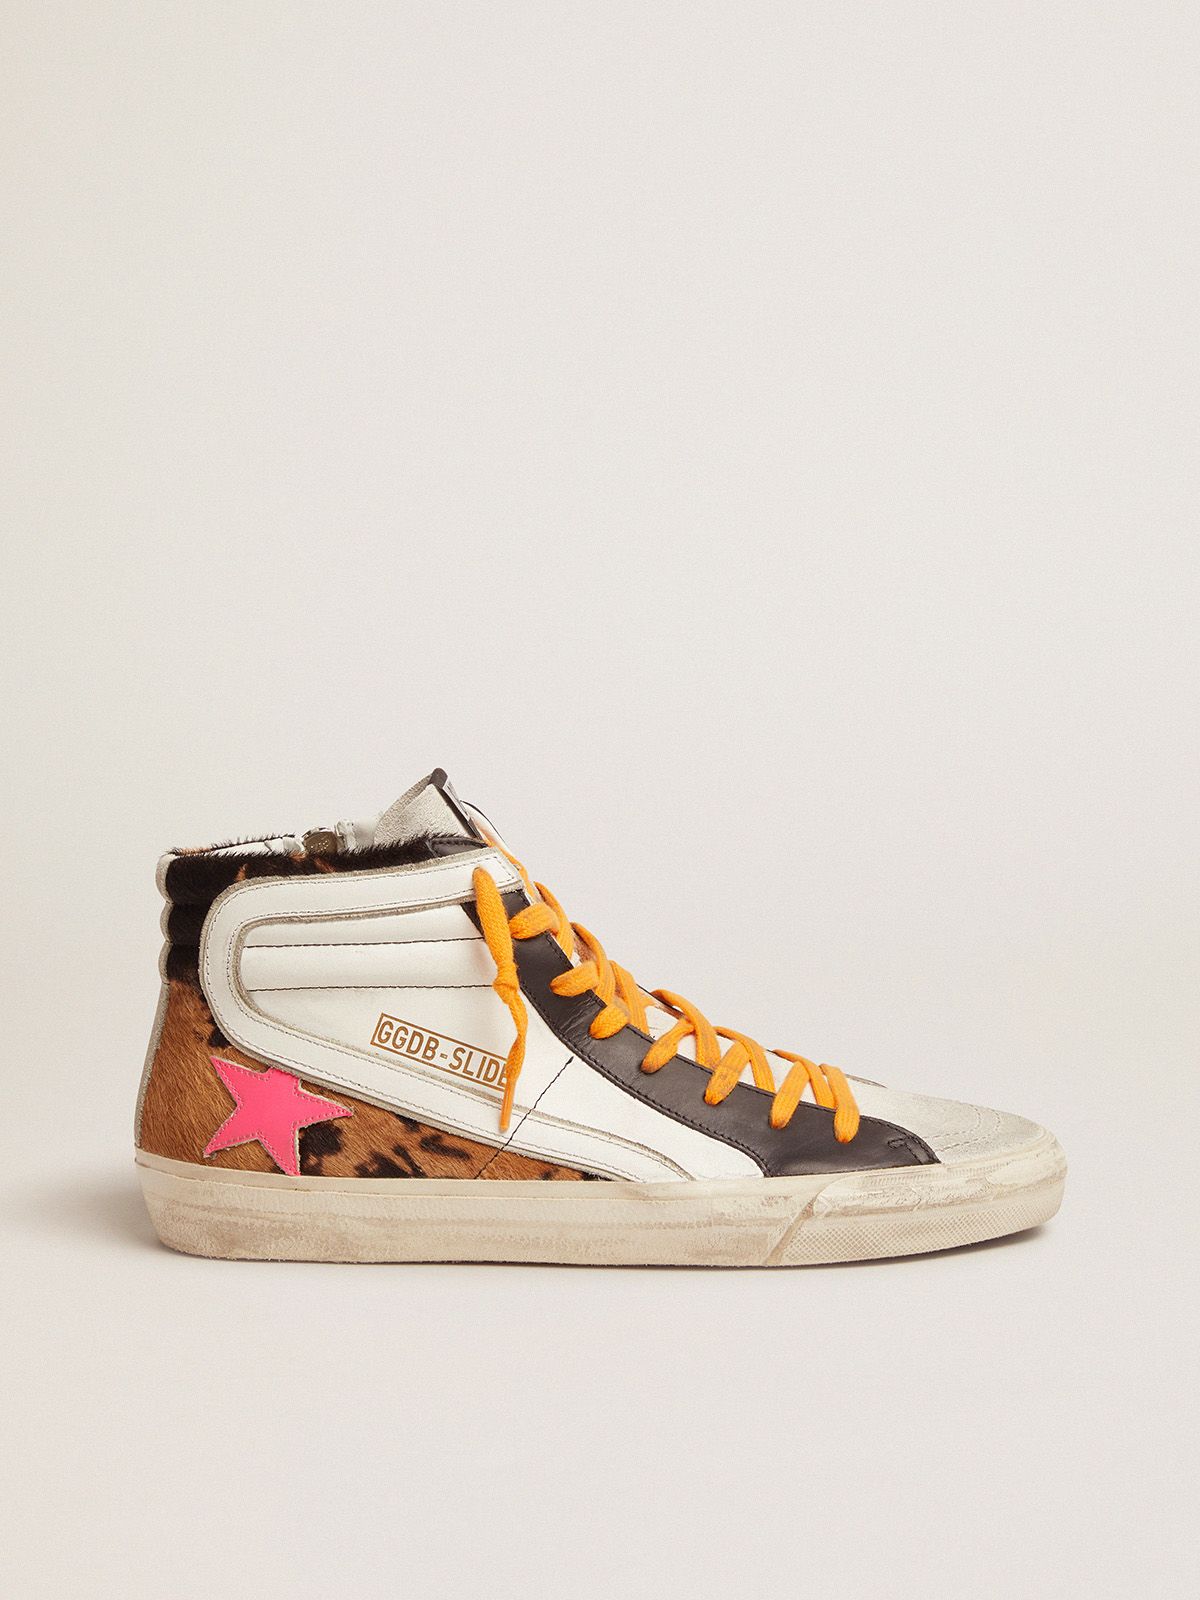 Golden Goose Donna Sneakers Slide sneakers in pony skin, leather and suede with orange laces and a fuchsia star